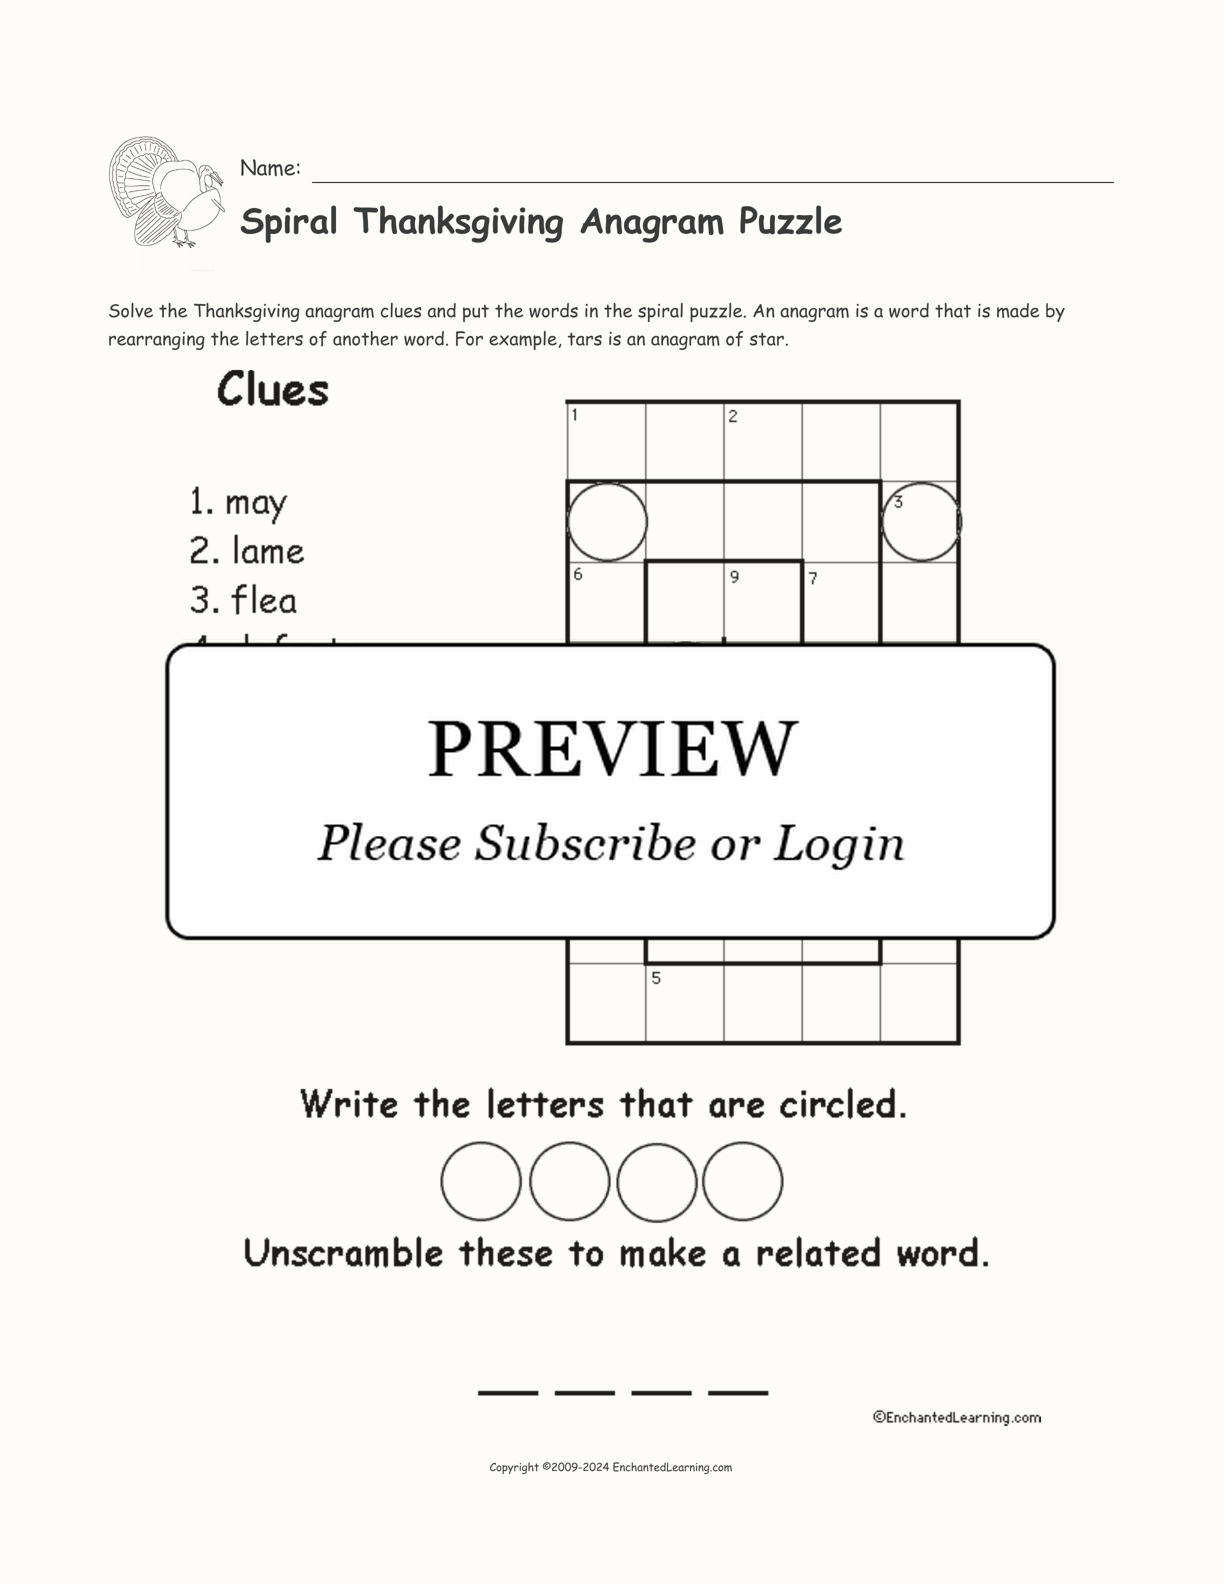 Spiral Thanksgiving Anagram Puzzle interactive worksheet page 1